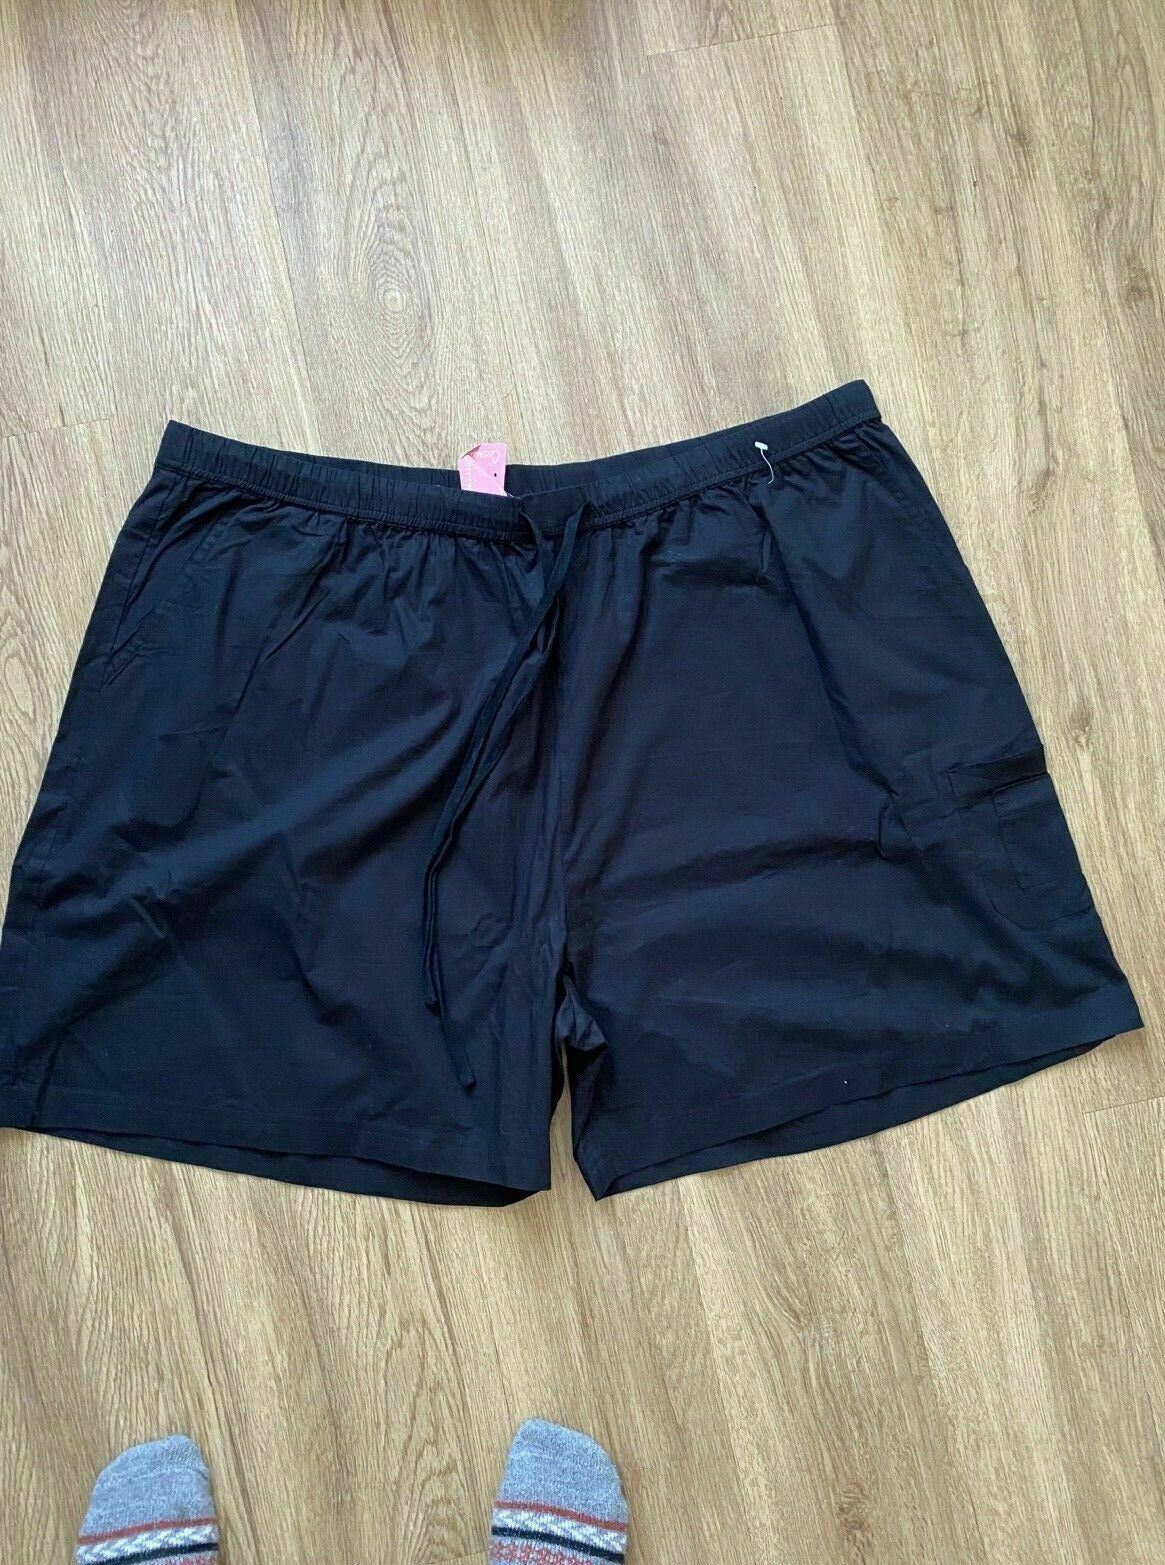 Casual Comfort Black Cotton Pull Cord Shorts Size 30 Pocket